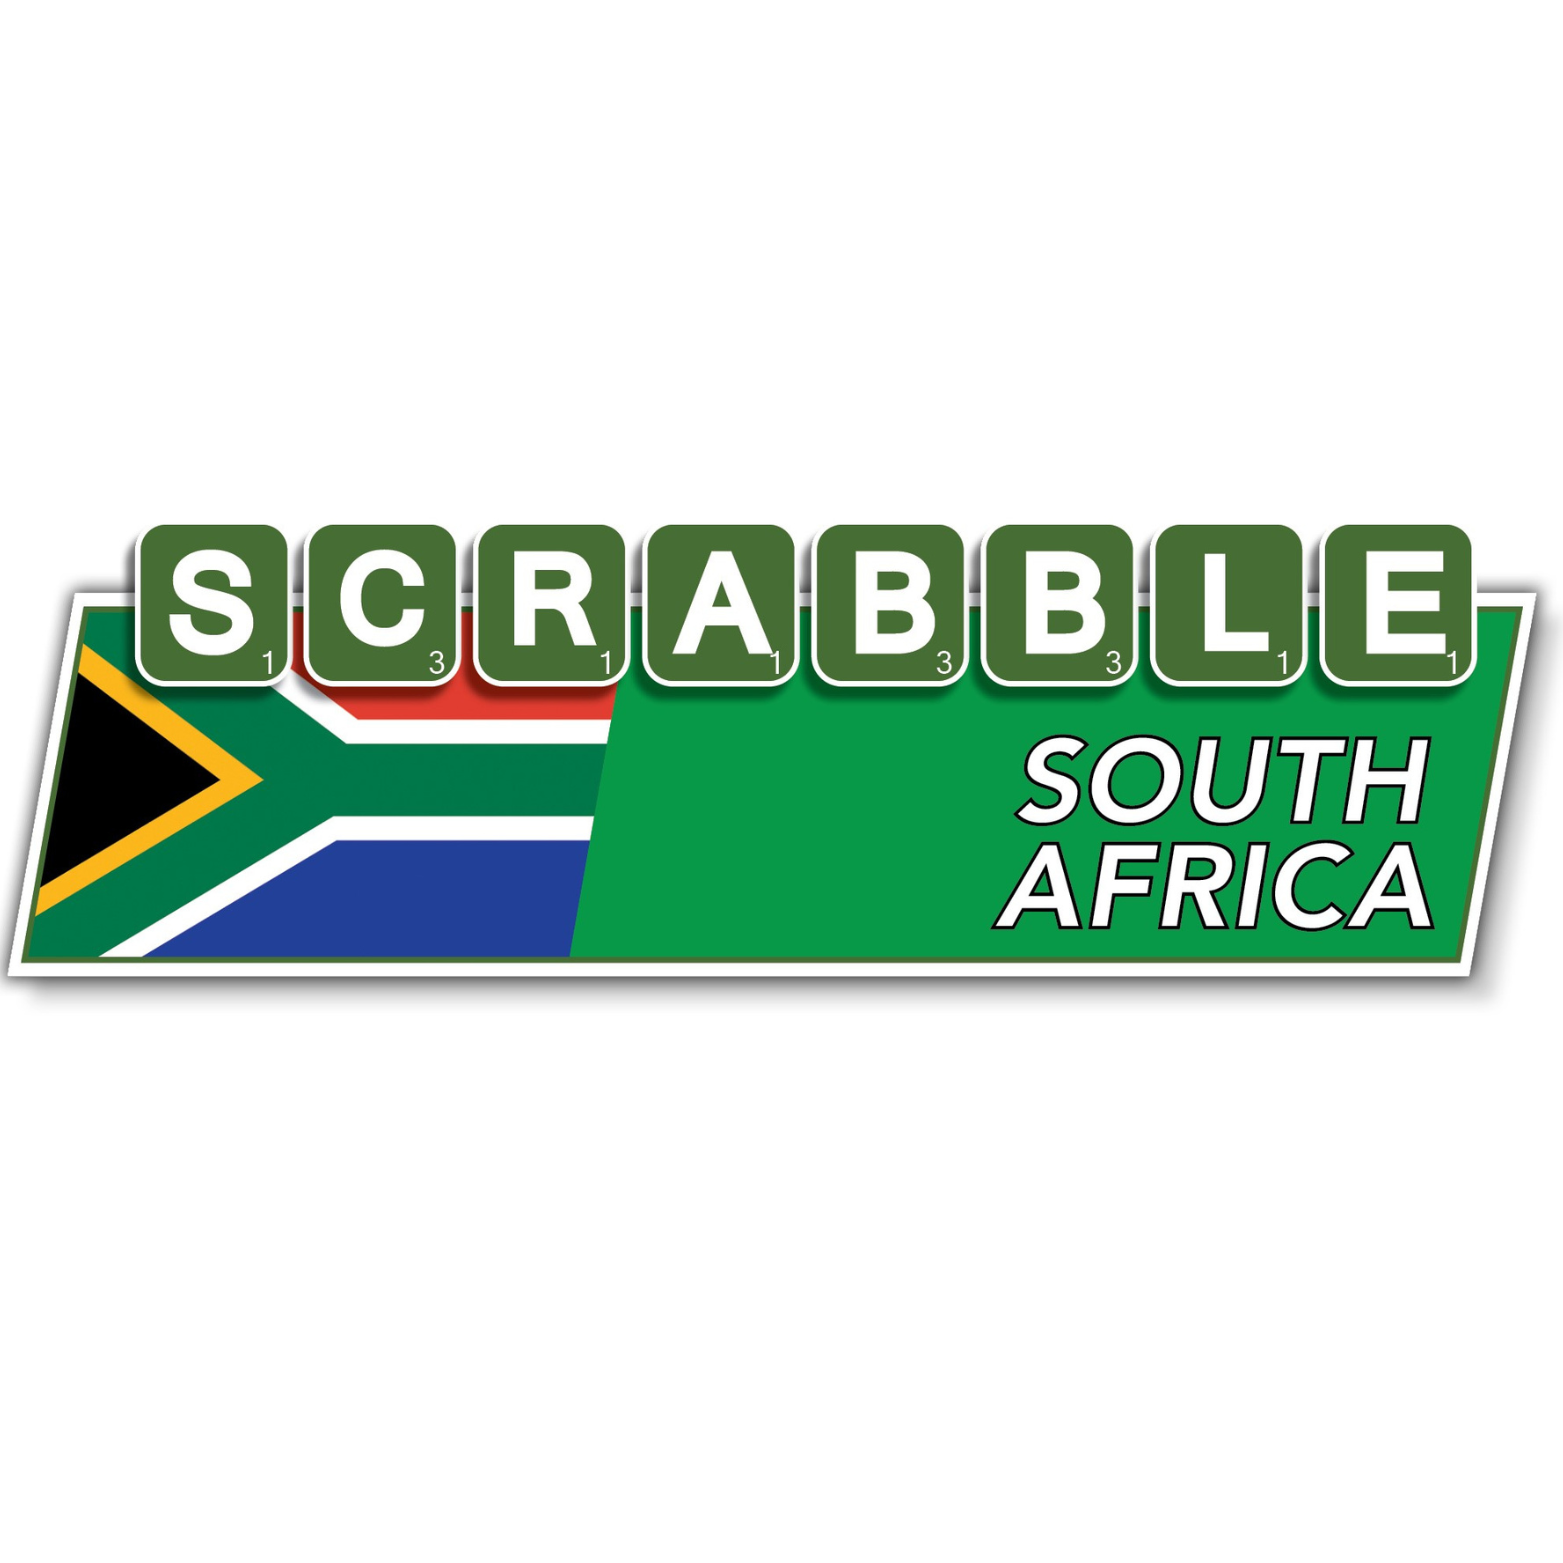 Scrabble South Africa